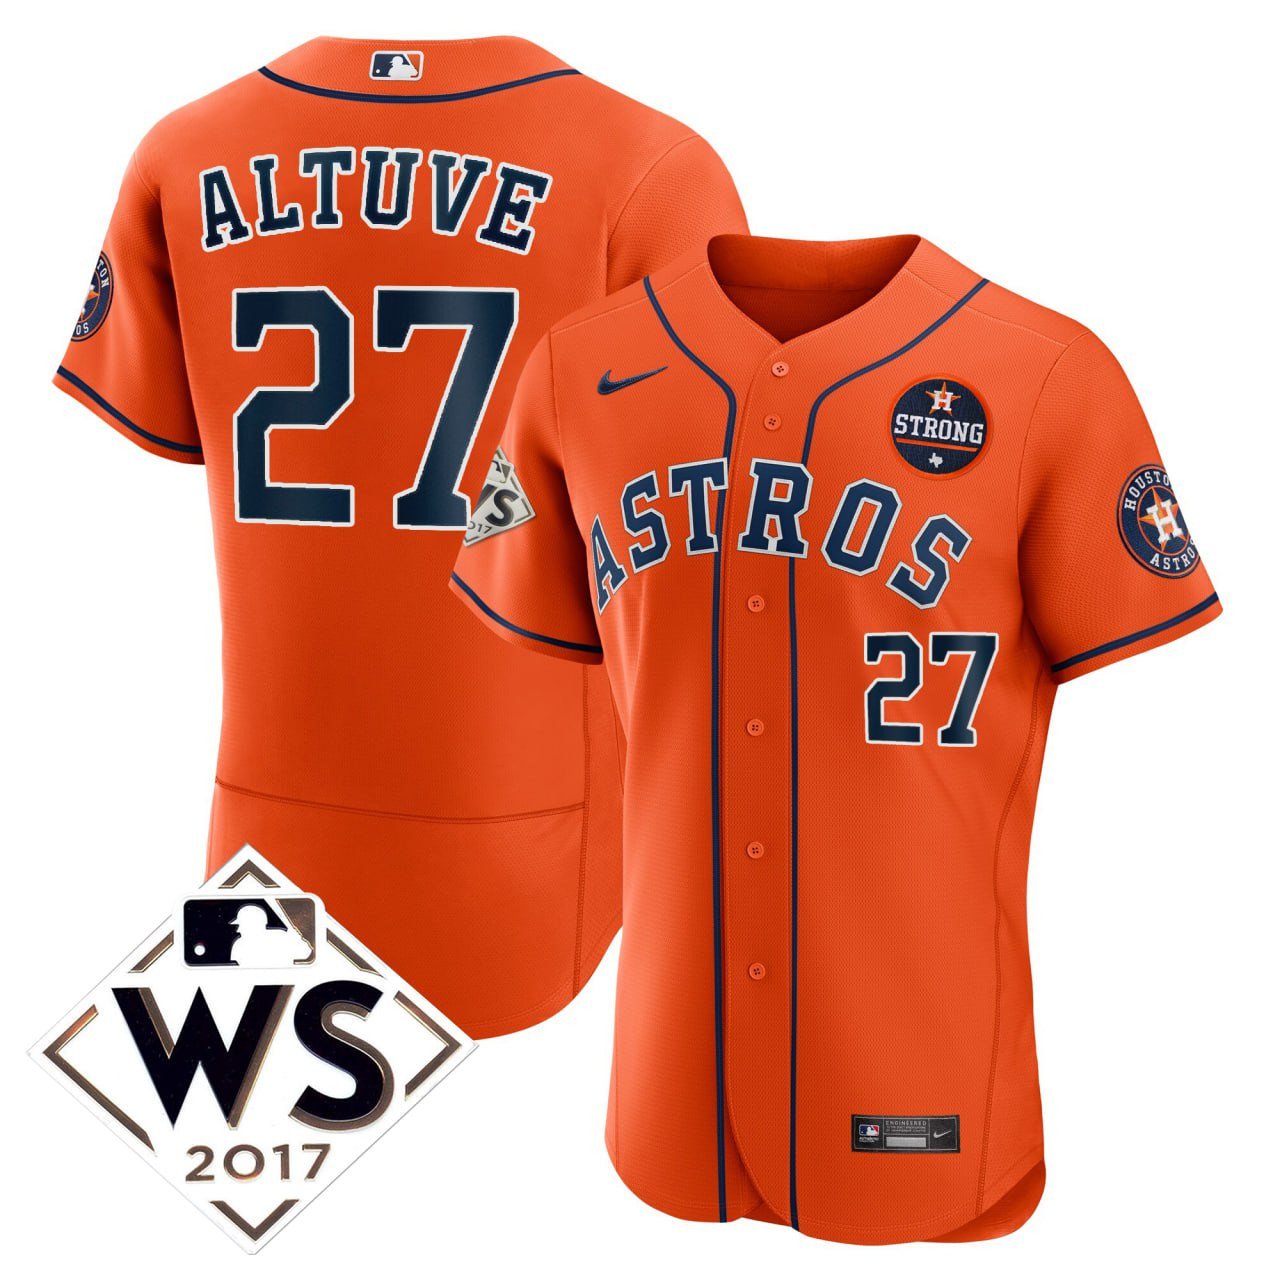 Men's Houston Astros World Series Classic Jersey - All Stitched